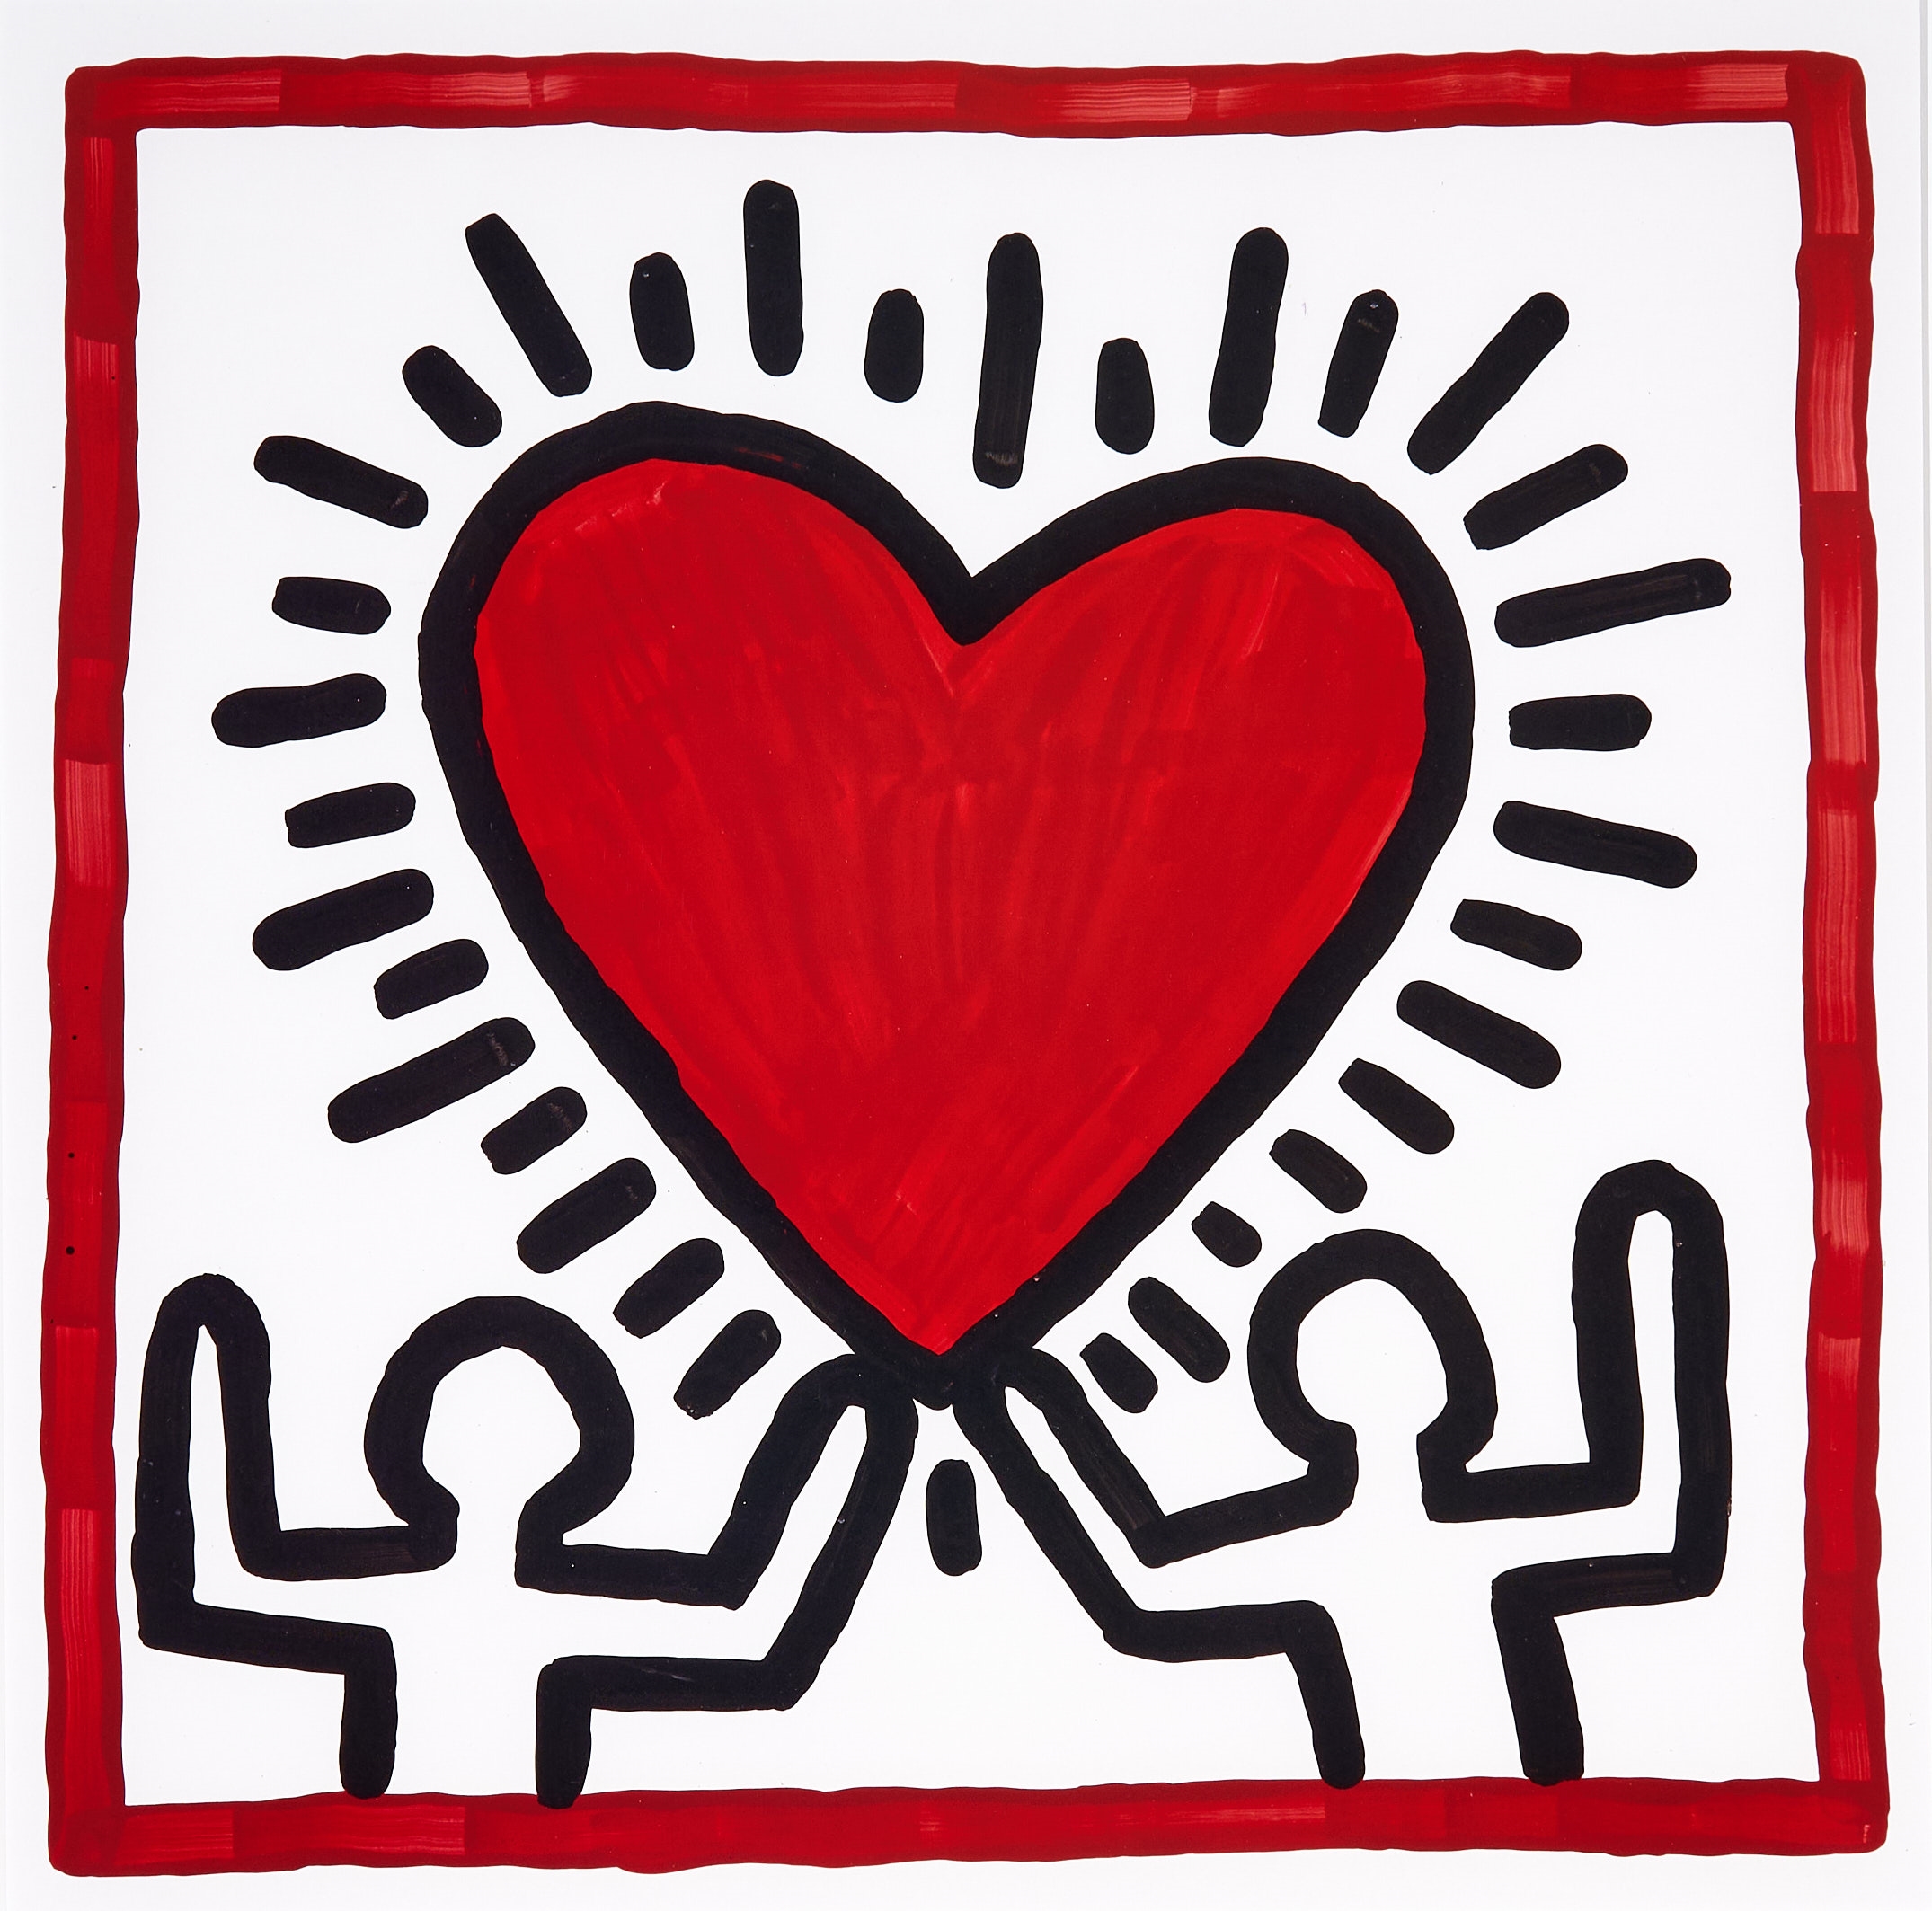 Untitled (Heart) by Keith Haring